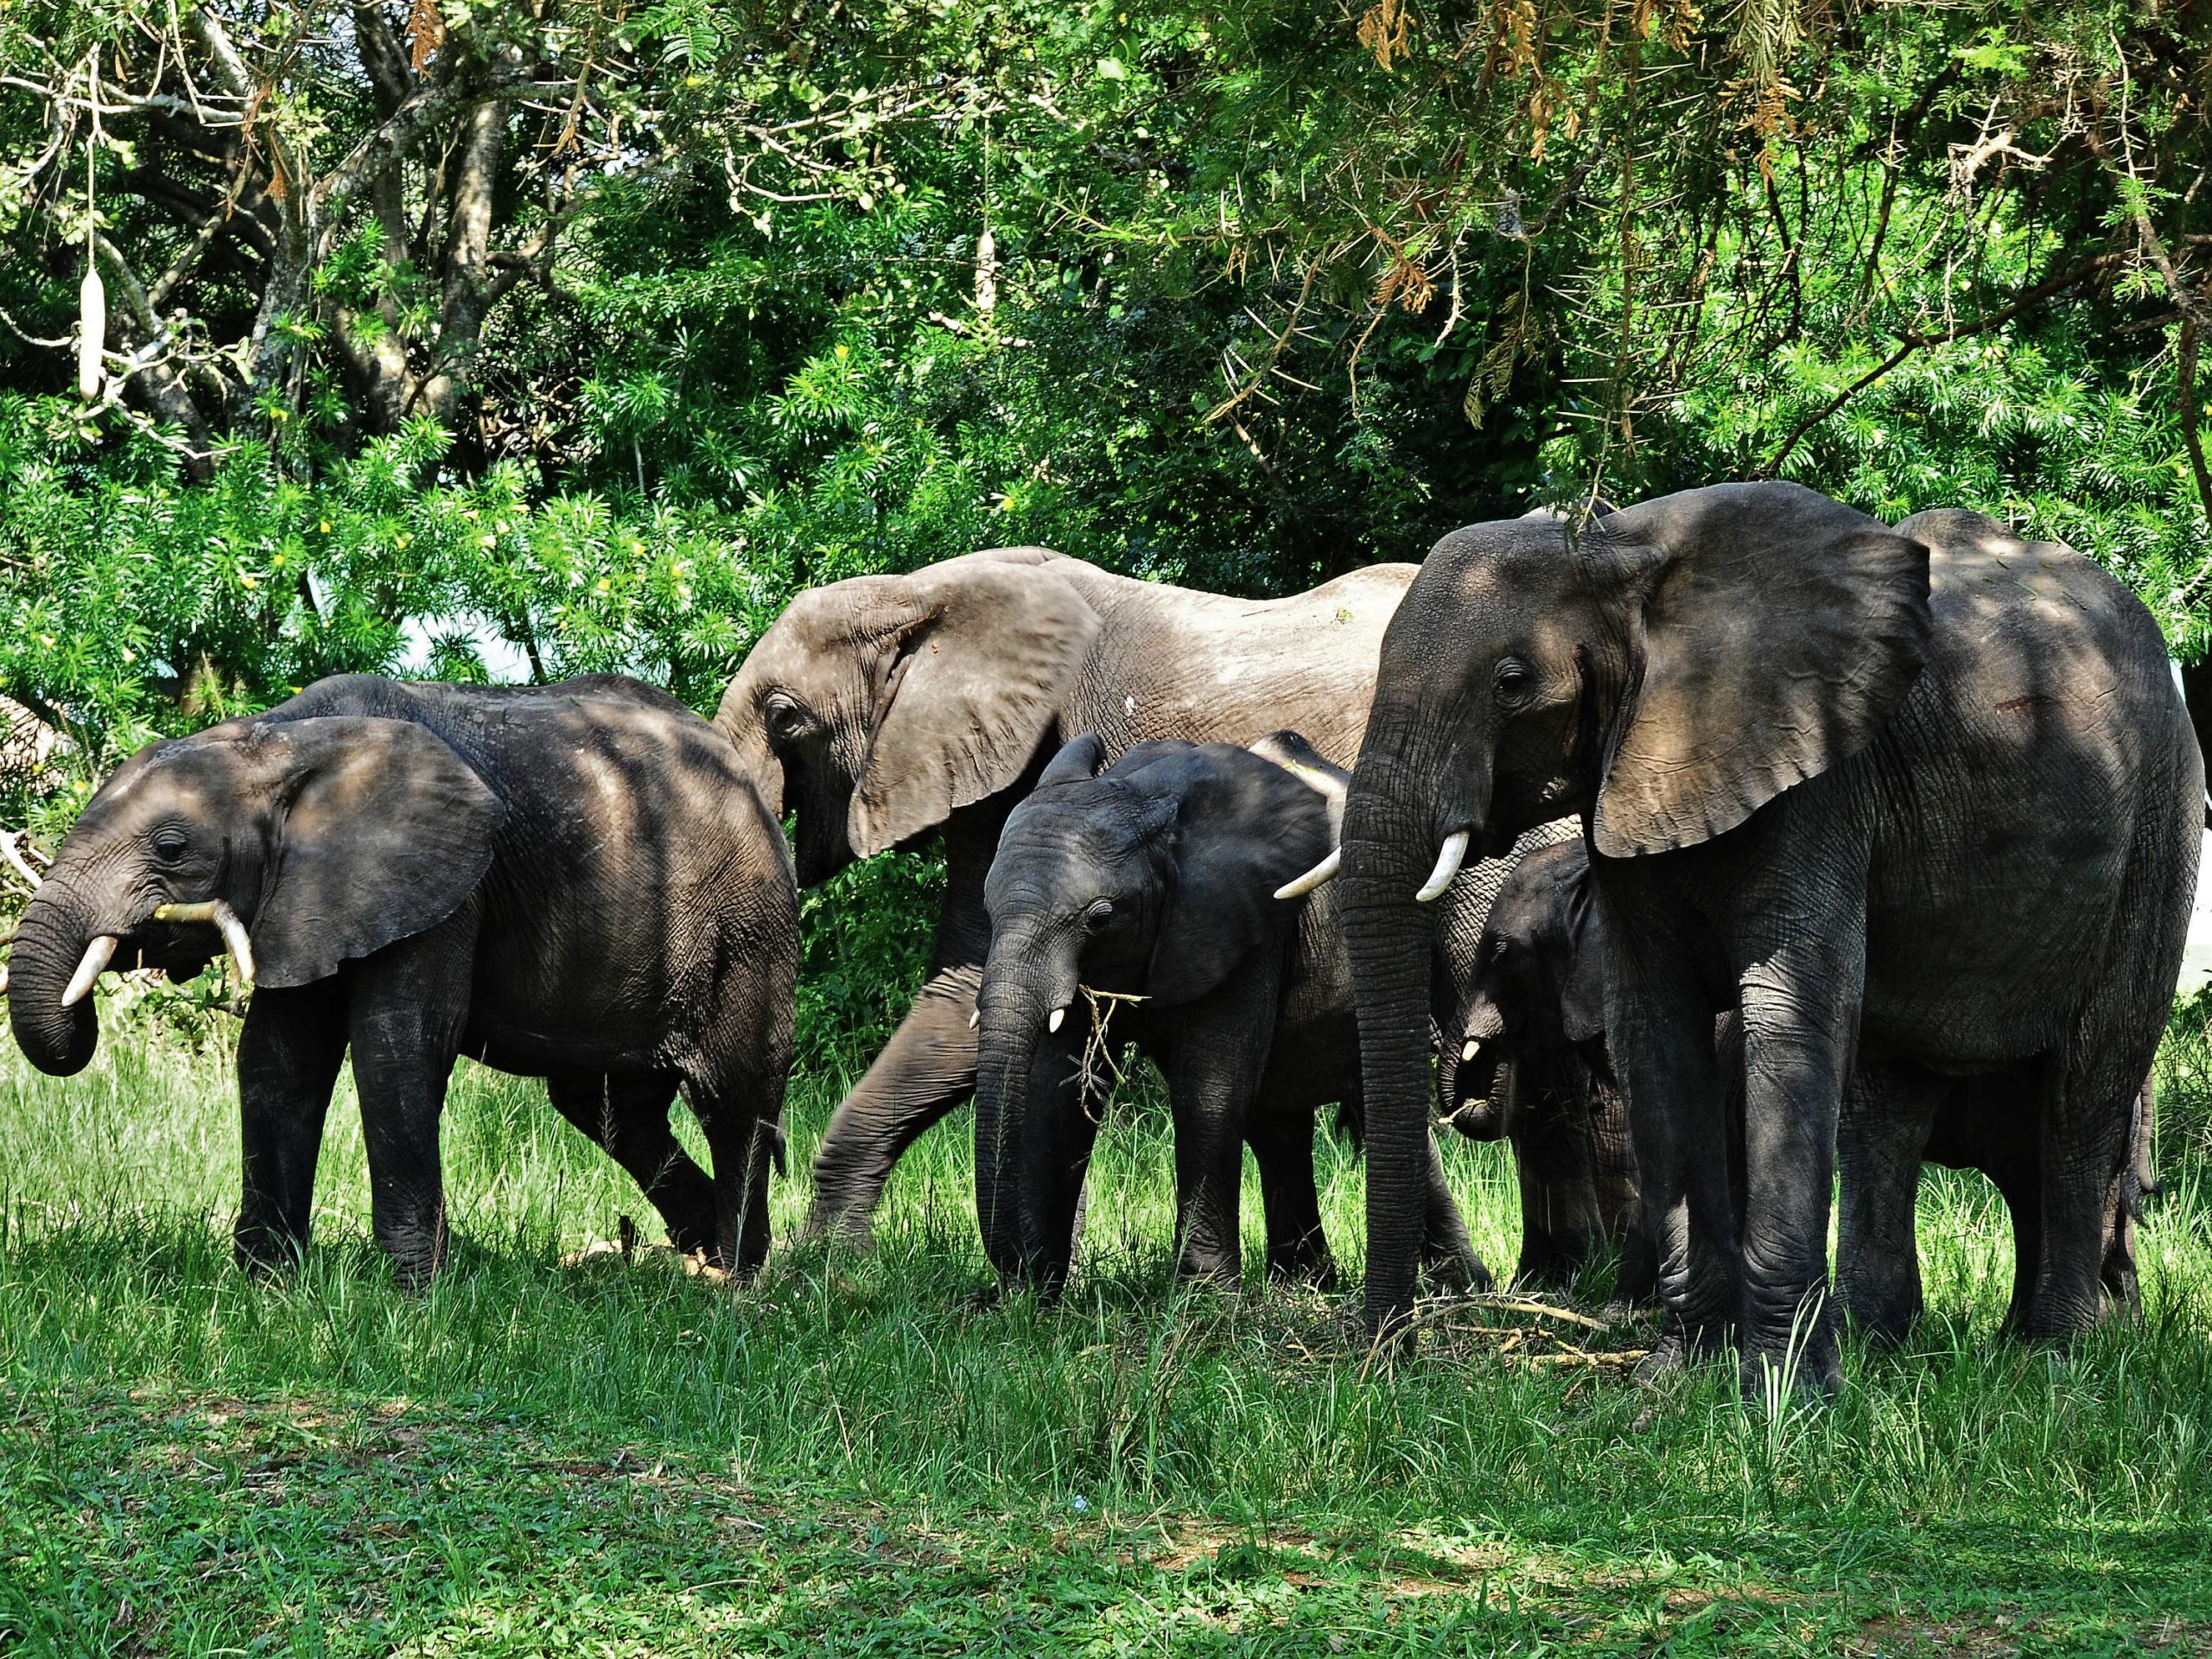 forest elephants in Rwenzori Mountains